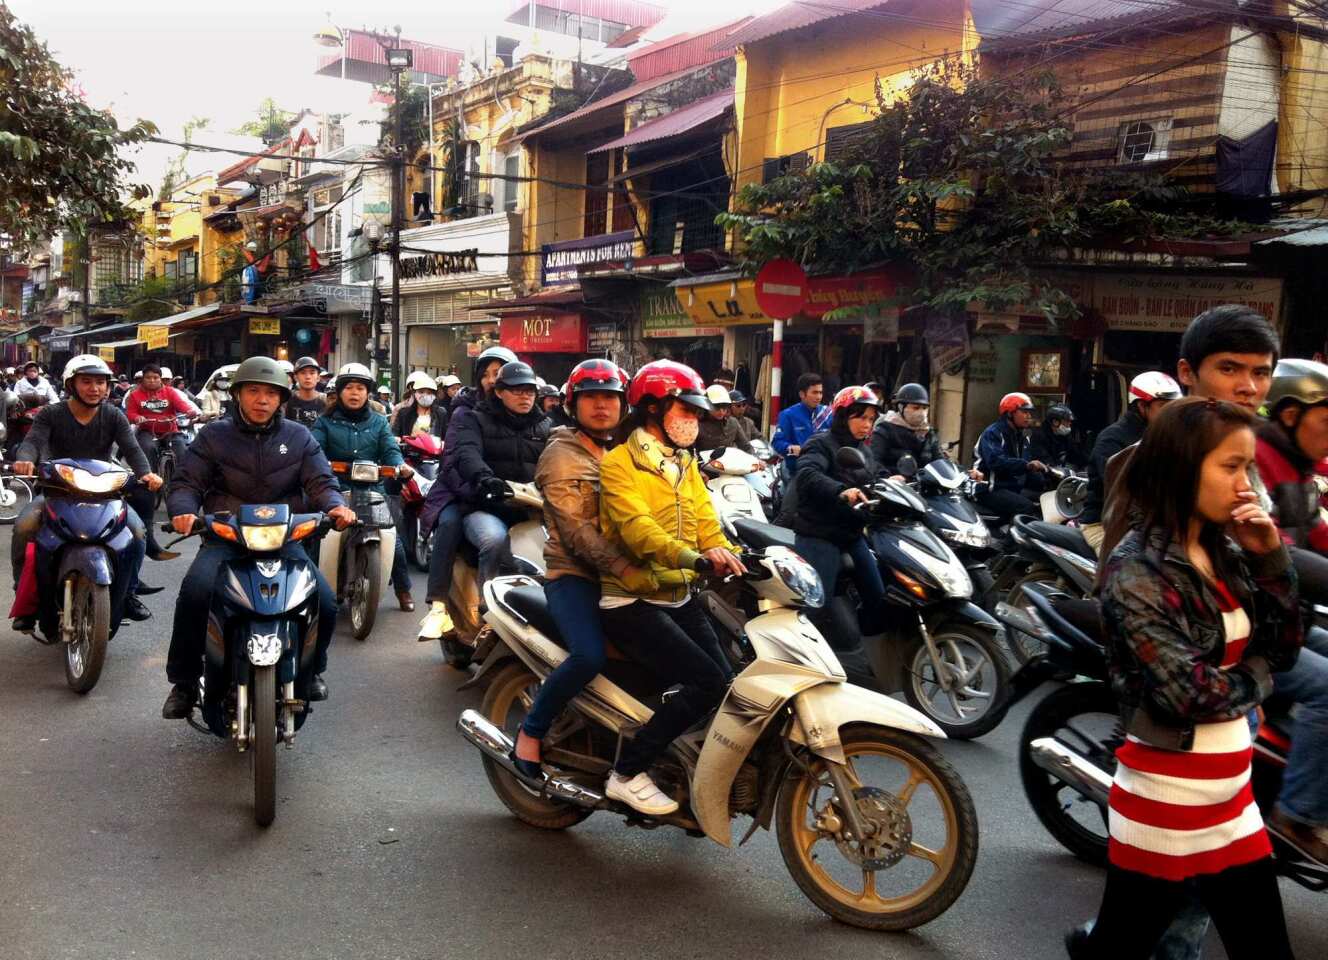 Motor scooters race through the hectic, narrow streets of Hanoi's Old Quarter. Scooters are the main mode of transport in Hanoi, and drivers stop for no one. Want to cross the street? Do as the locals do and step directly into the fray.